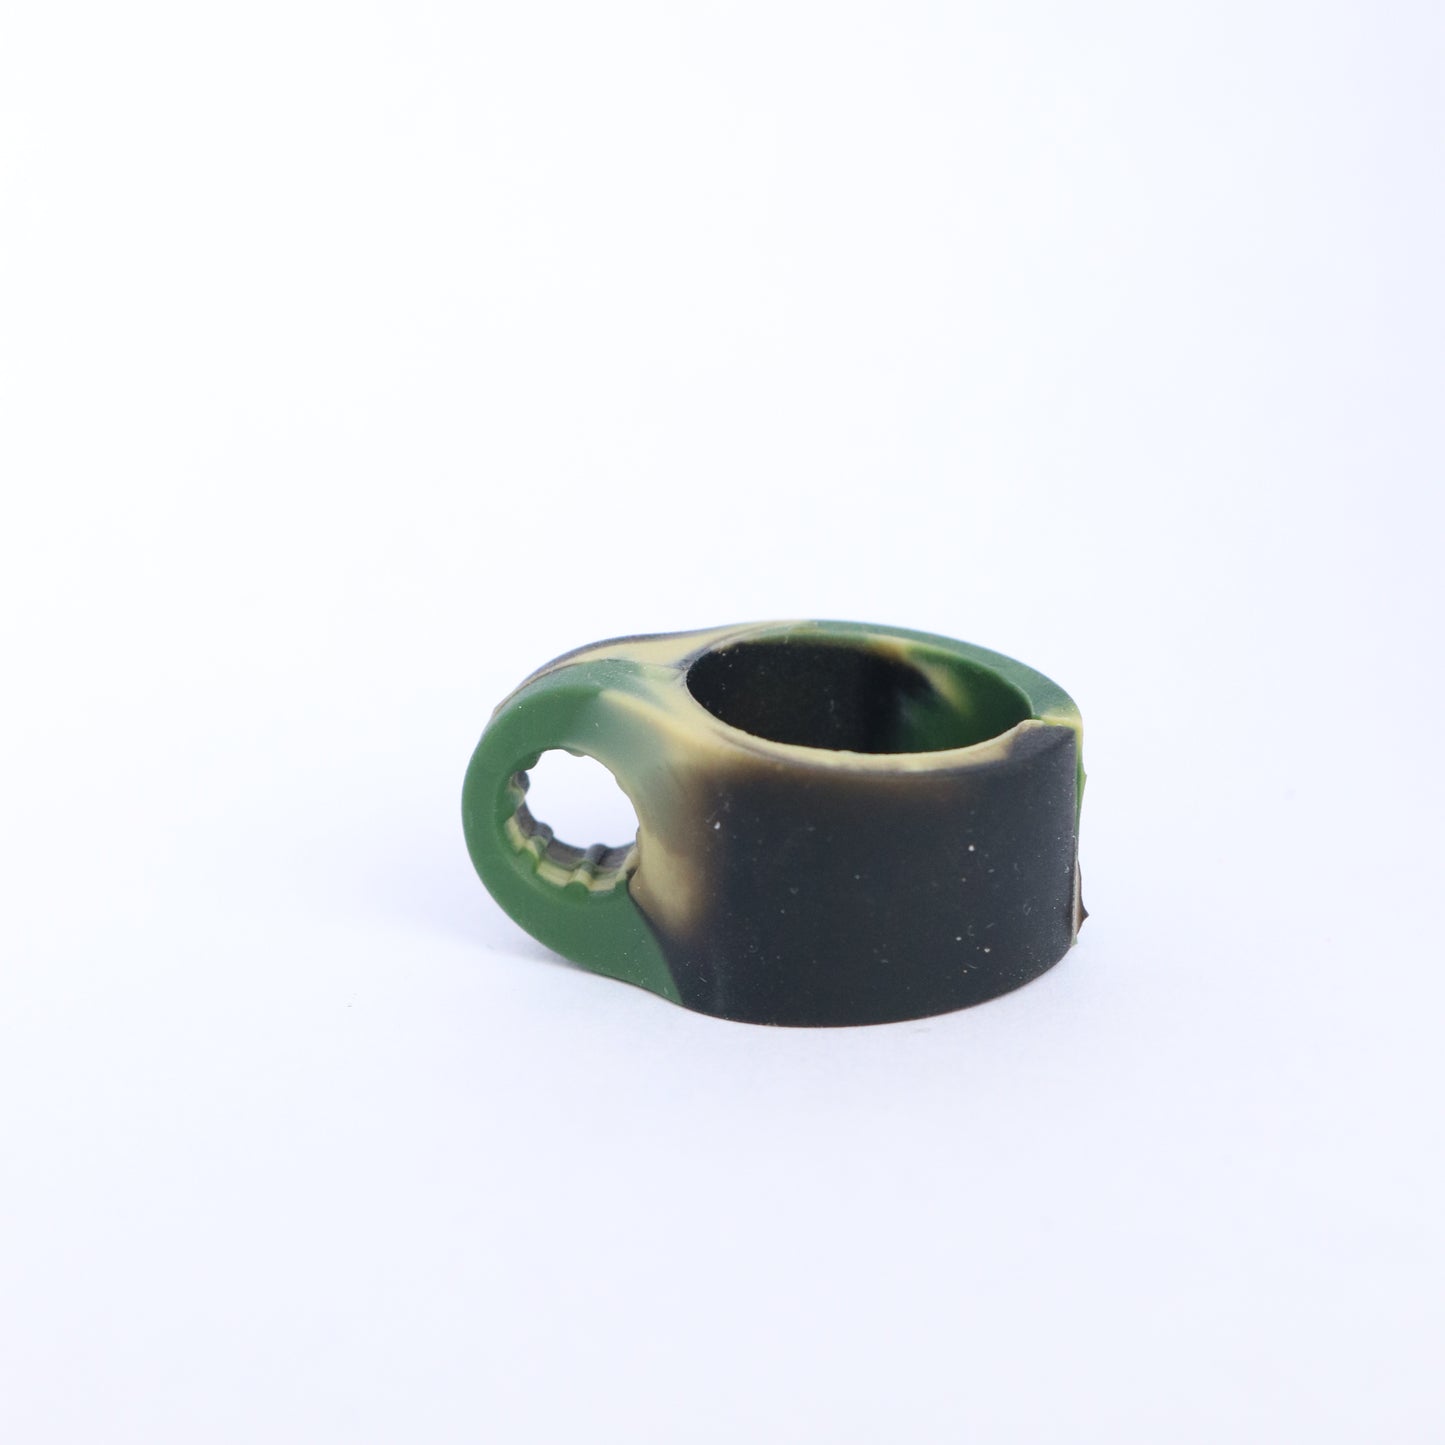 Silicone ring joint holder - Fancy Puffs Smoke Shop